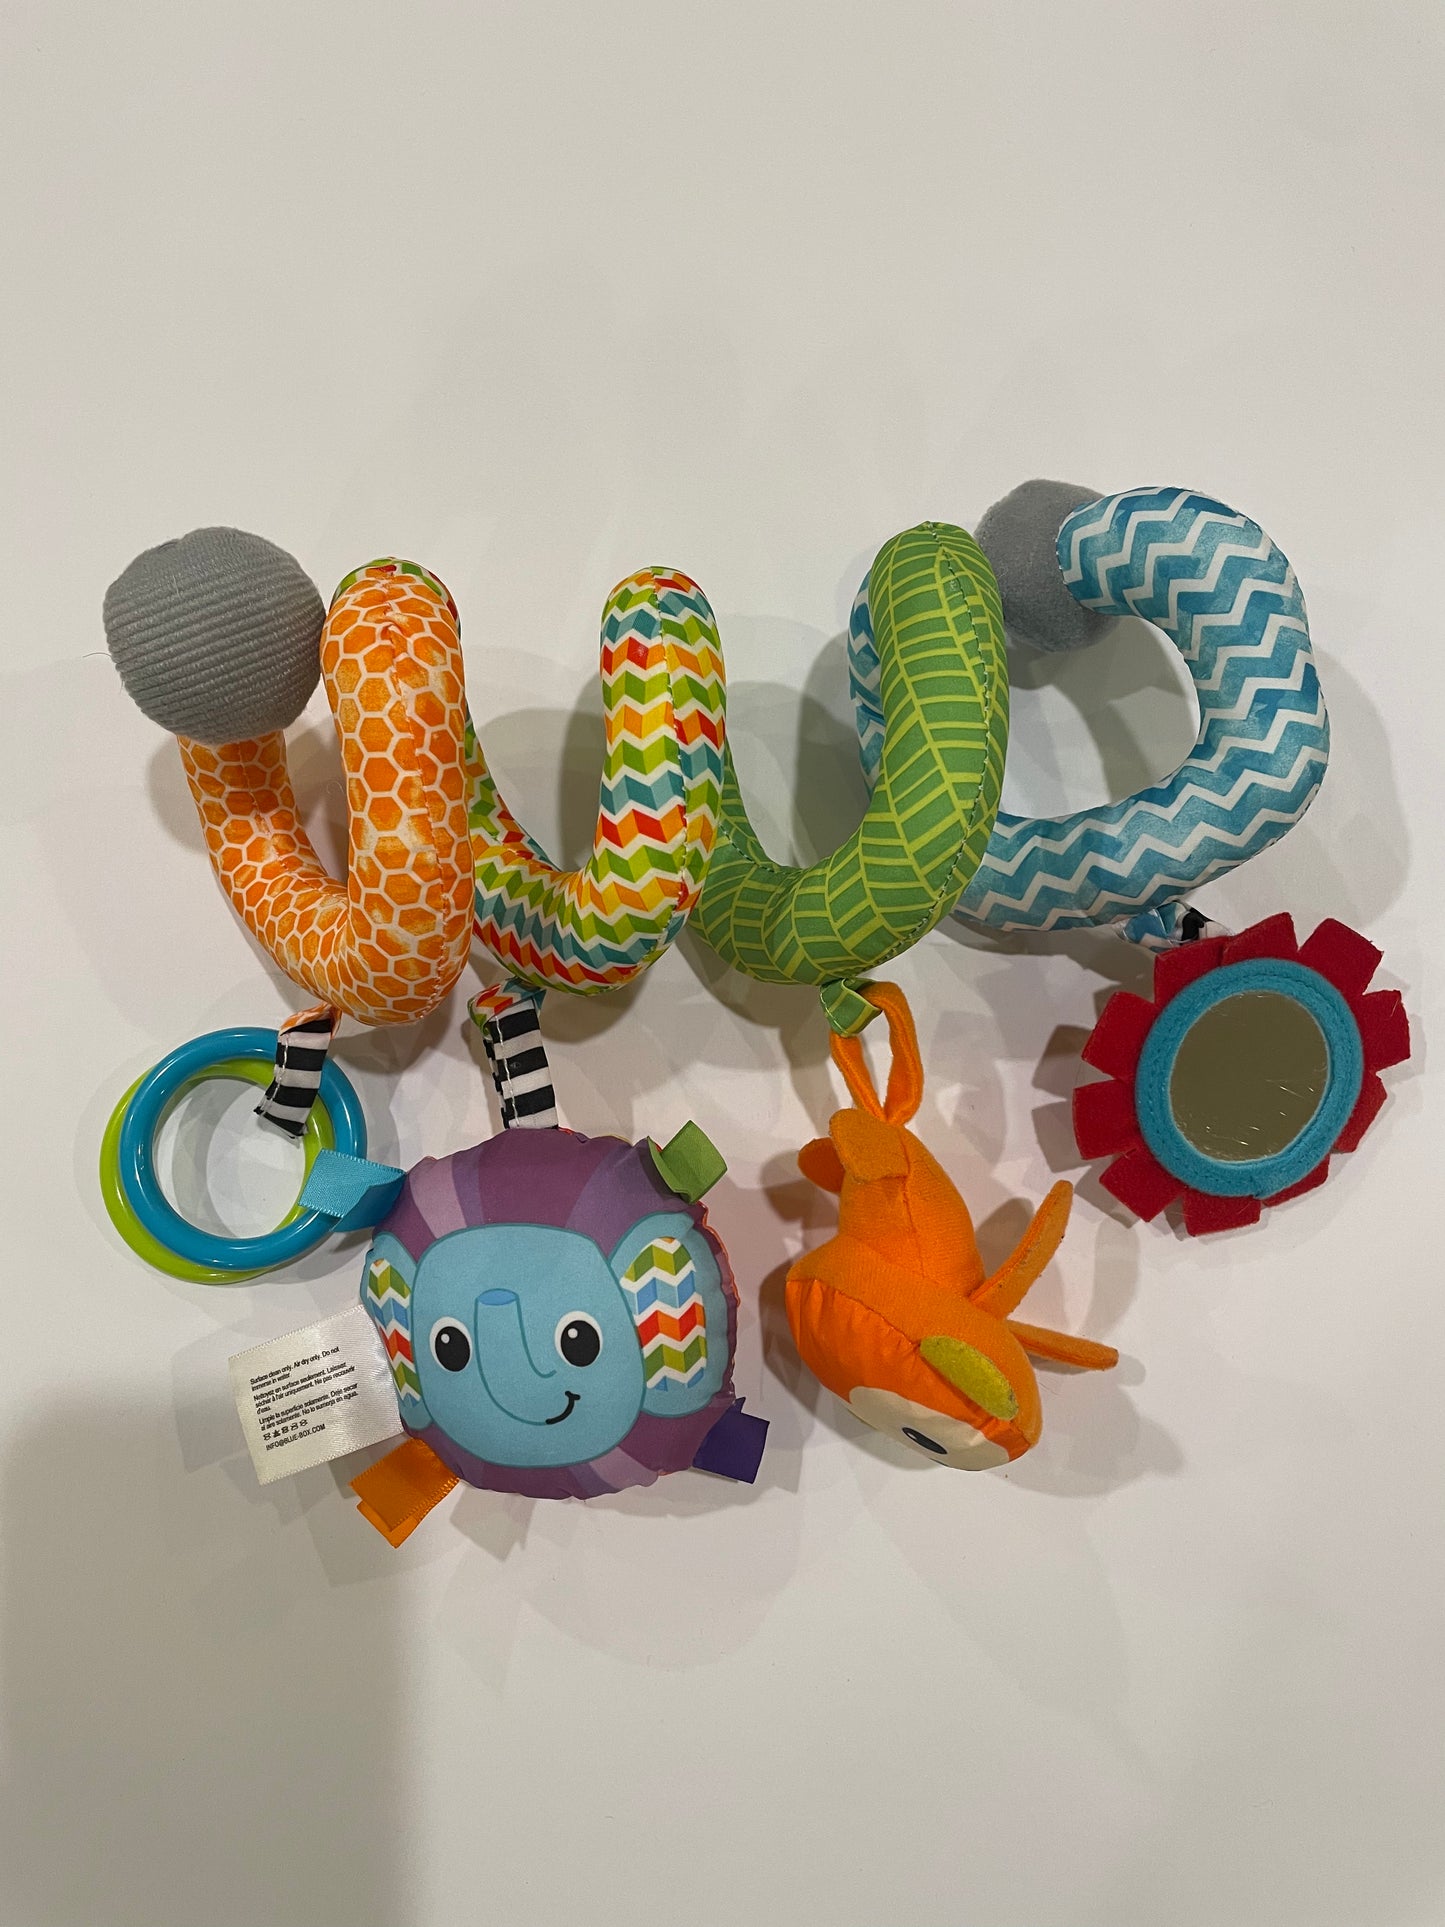 stroller toy, loops onto stroller or carseat